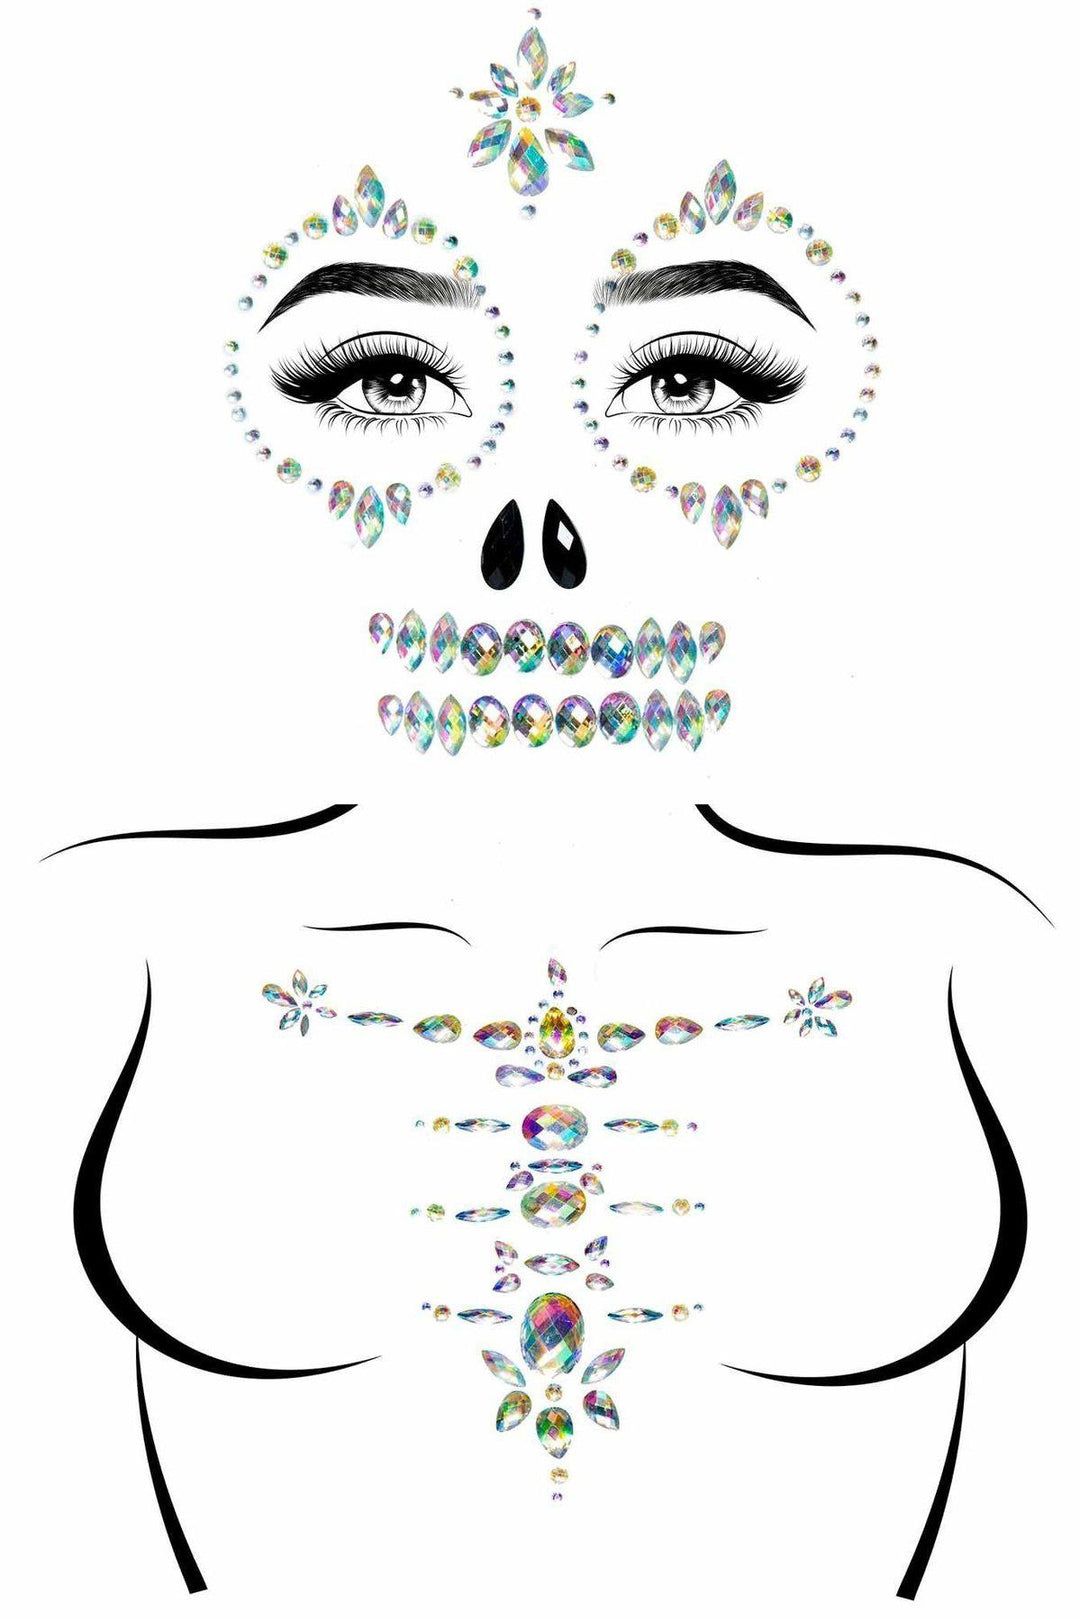 Skeleton Adhesive Face Body Jewels-Body Jewelry-Leg Avenue-Clear-O/S-SEXYSHOES.COM